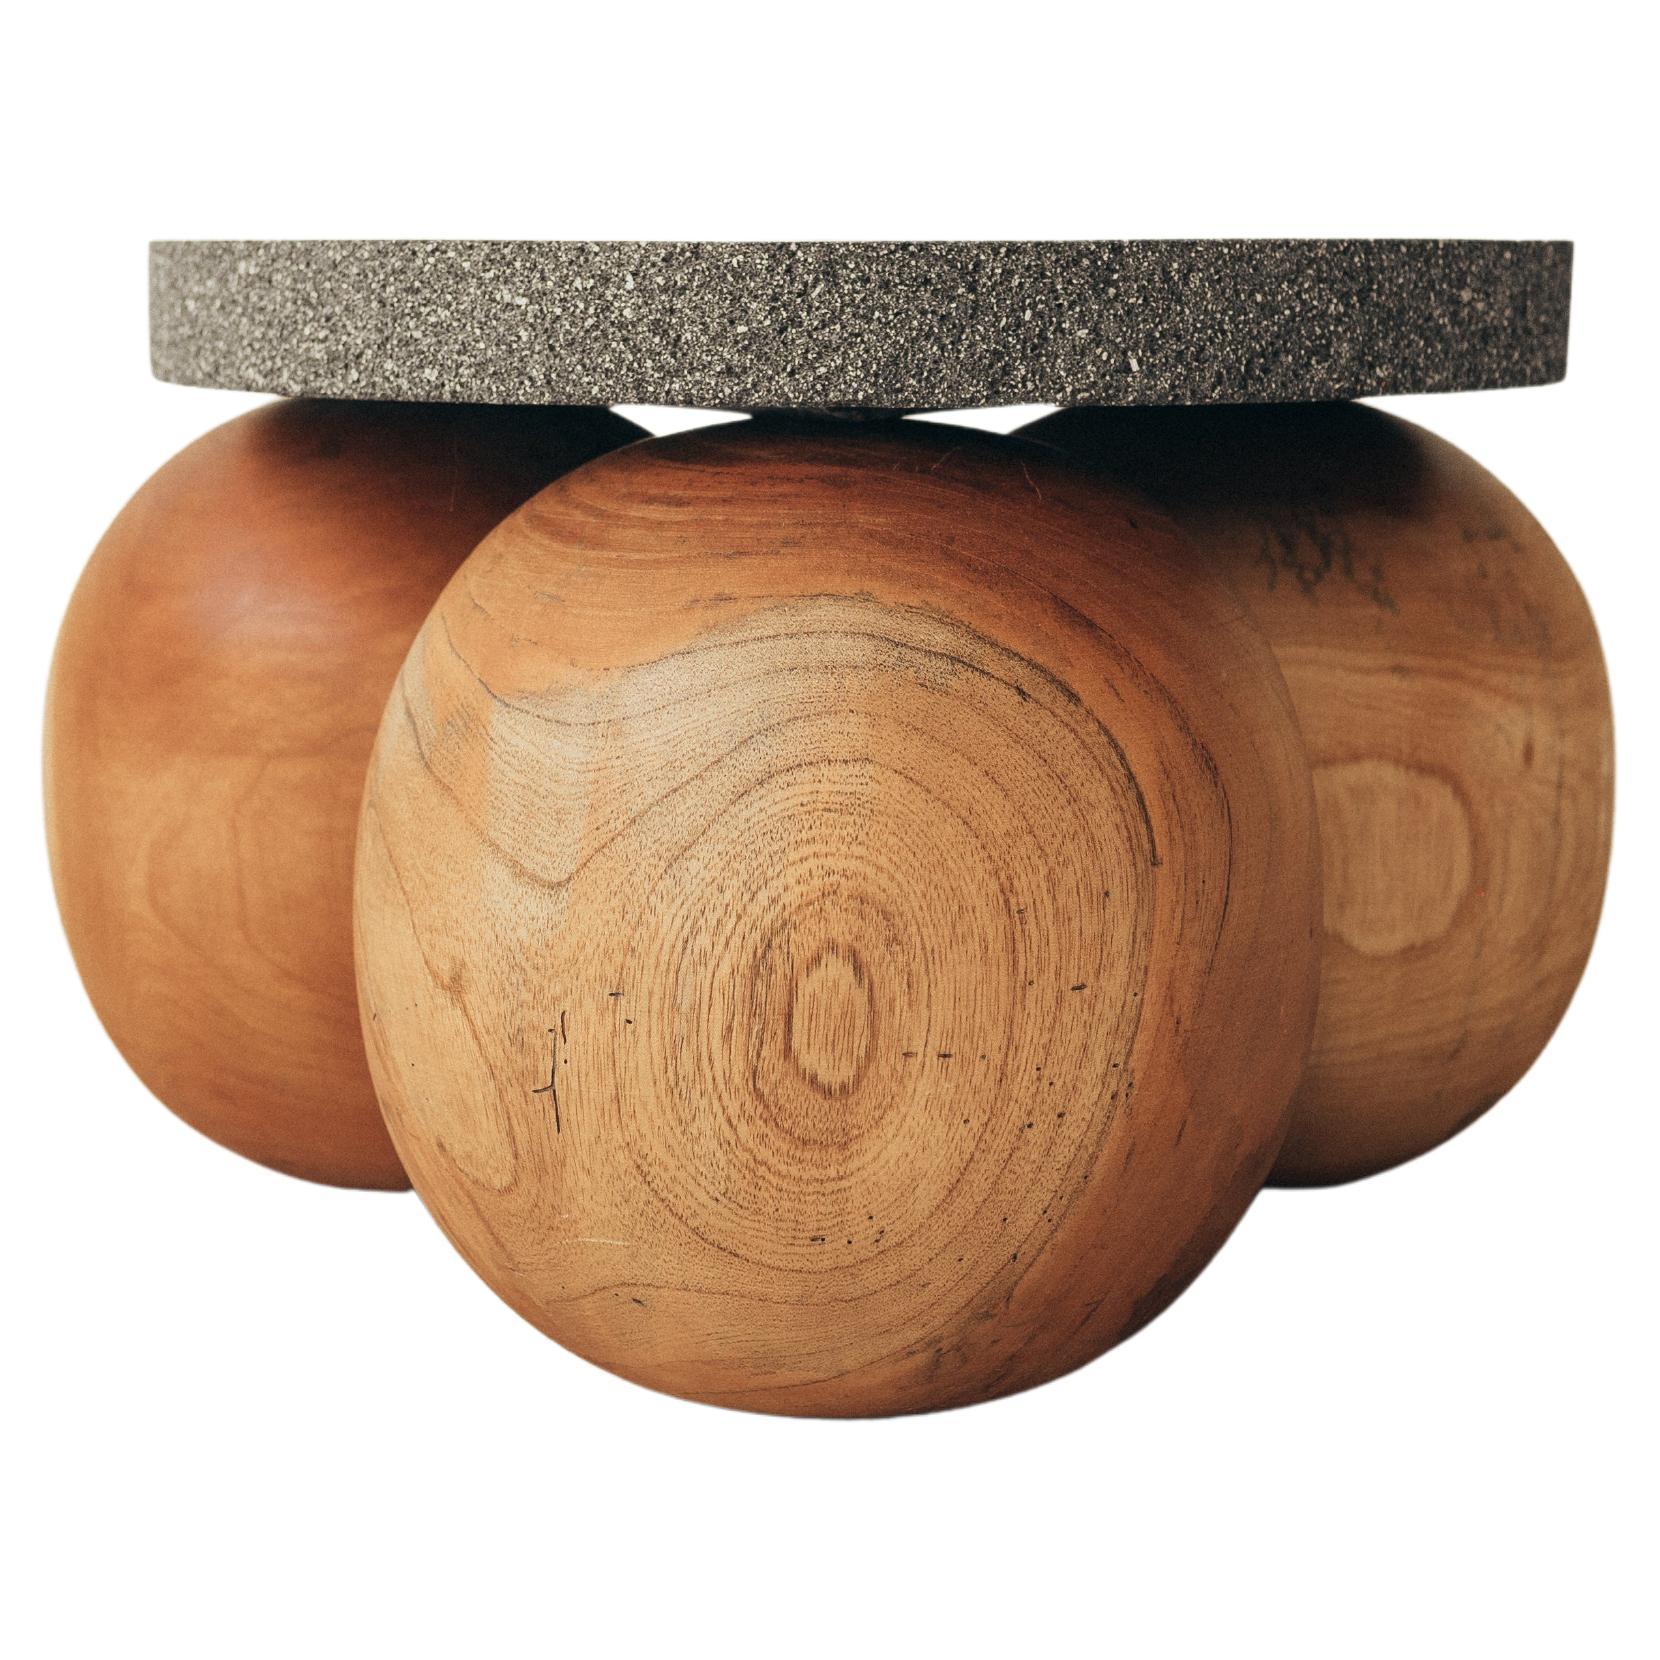 Natural Wooden Balls Table with Volcanic Stone Cover by Daniel Orozco For Sale